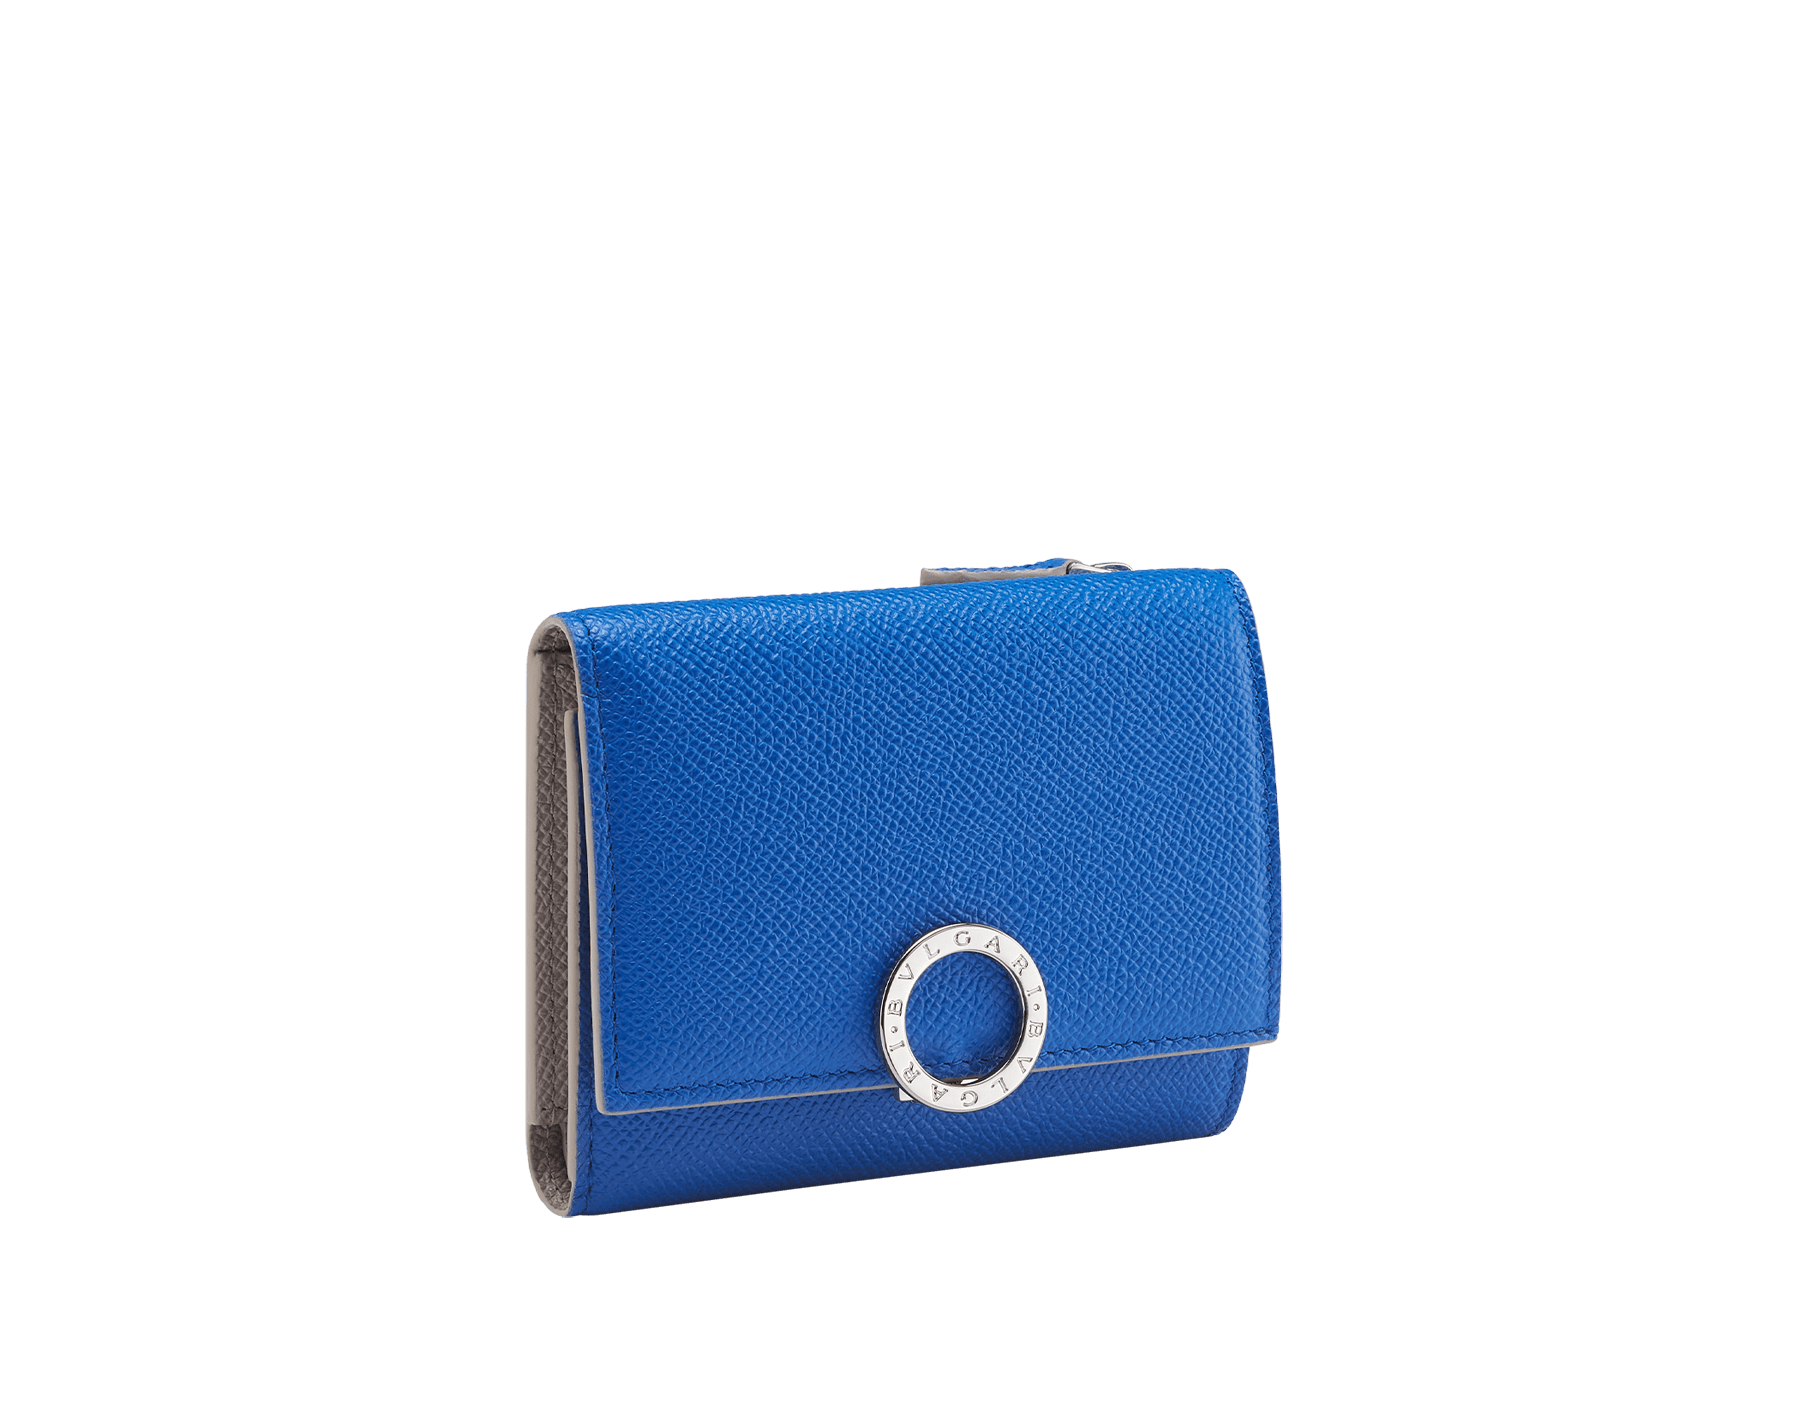 Bulgari Clip compact yen wallet in Olympian sapphire blue grain calf leather with foggy opal grey grain calf leather interior. Iconic palladium-plated brass clip and folded closure. BCM-YENCOMPACTZPb image 1